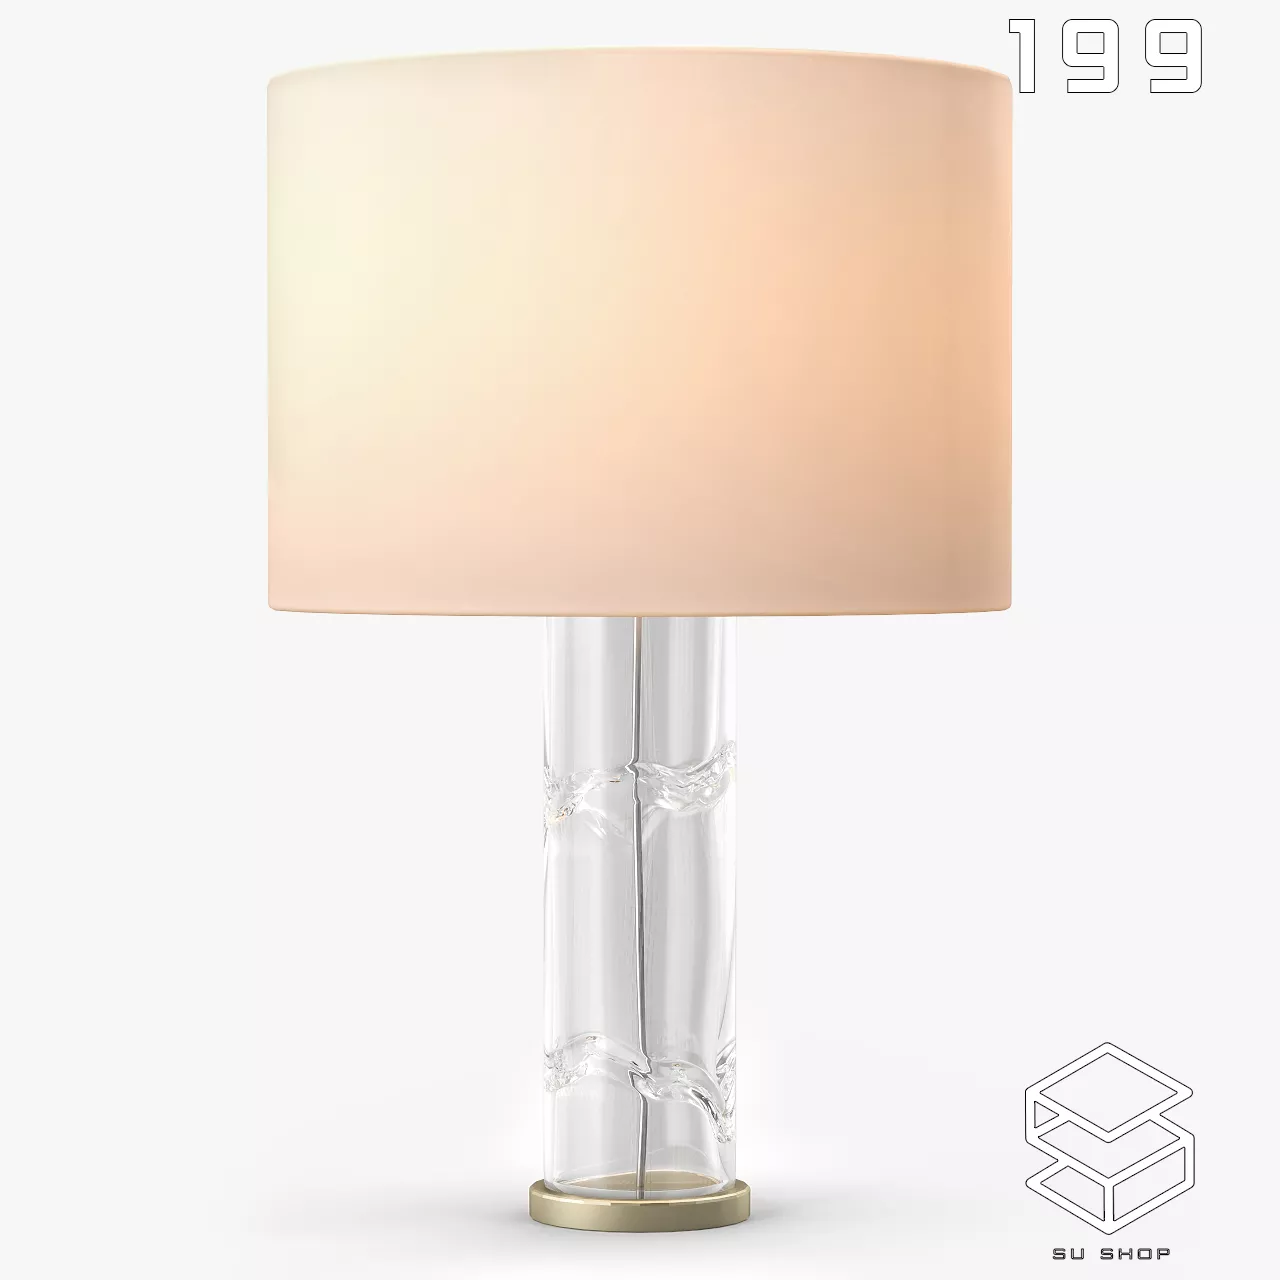 MODERN TABLE LAMP - SKETCHUP 3D MODEL - VRAY OR ENSCAPE - ID14773